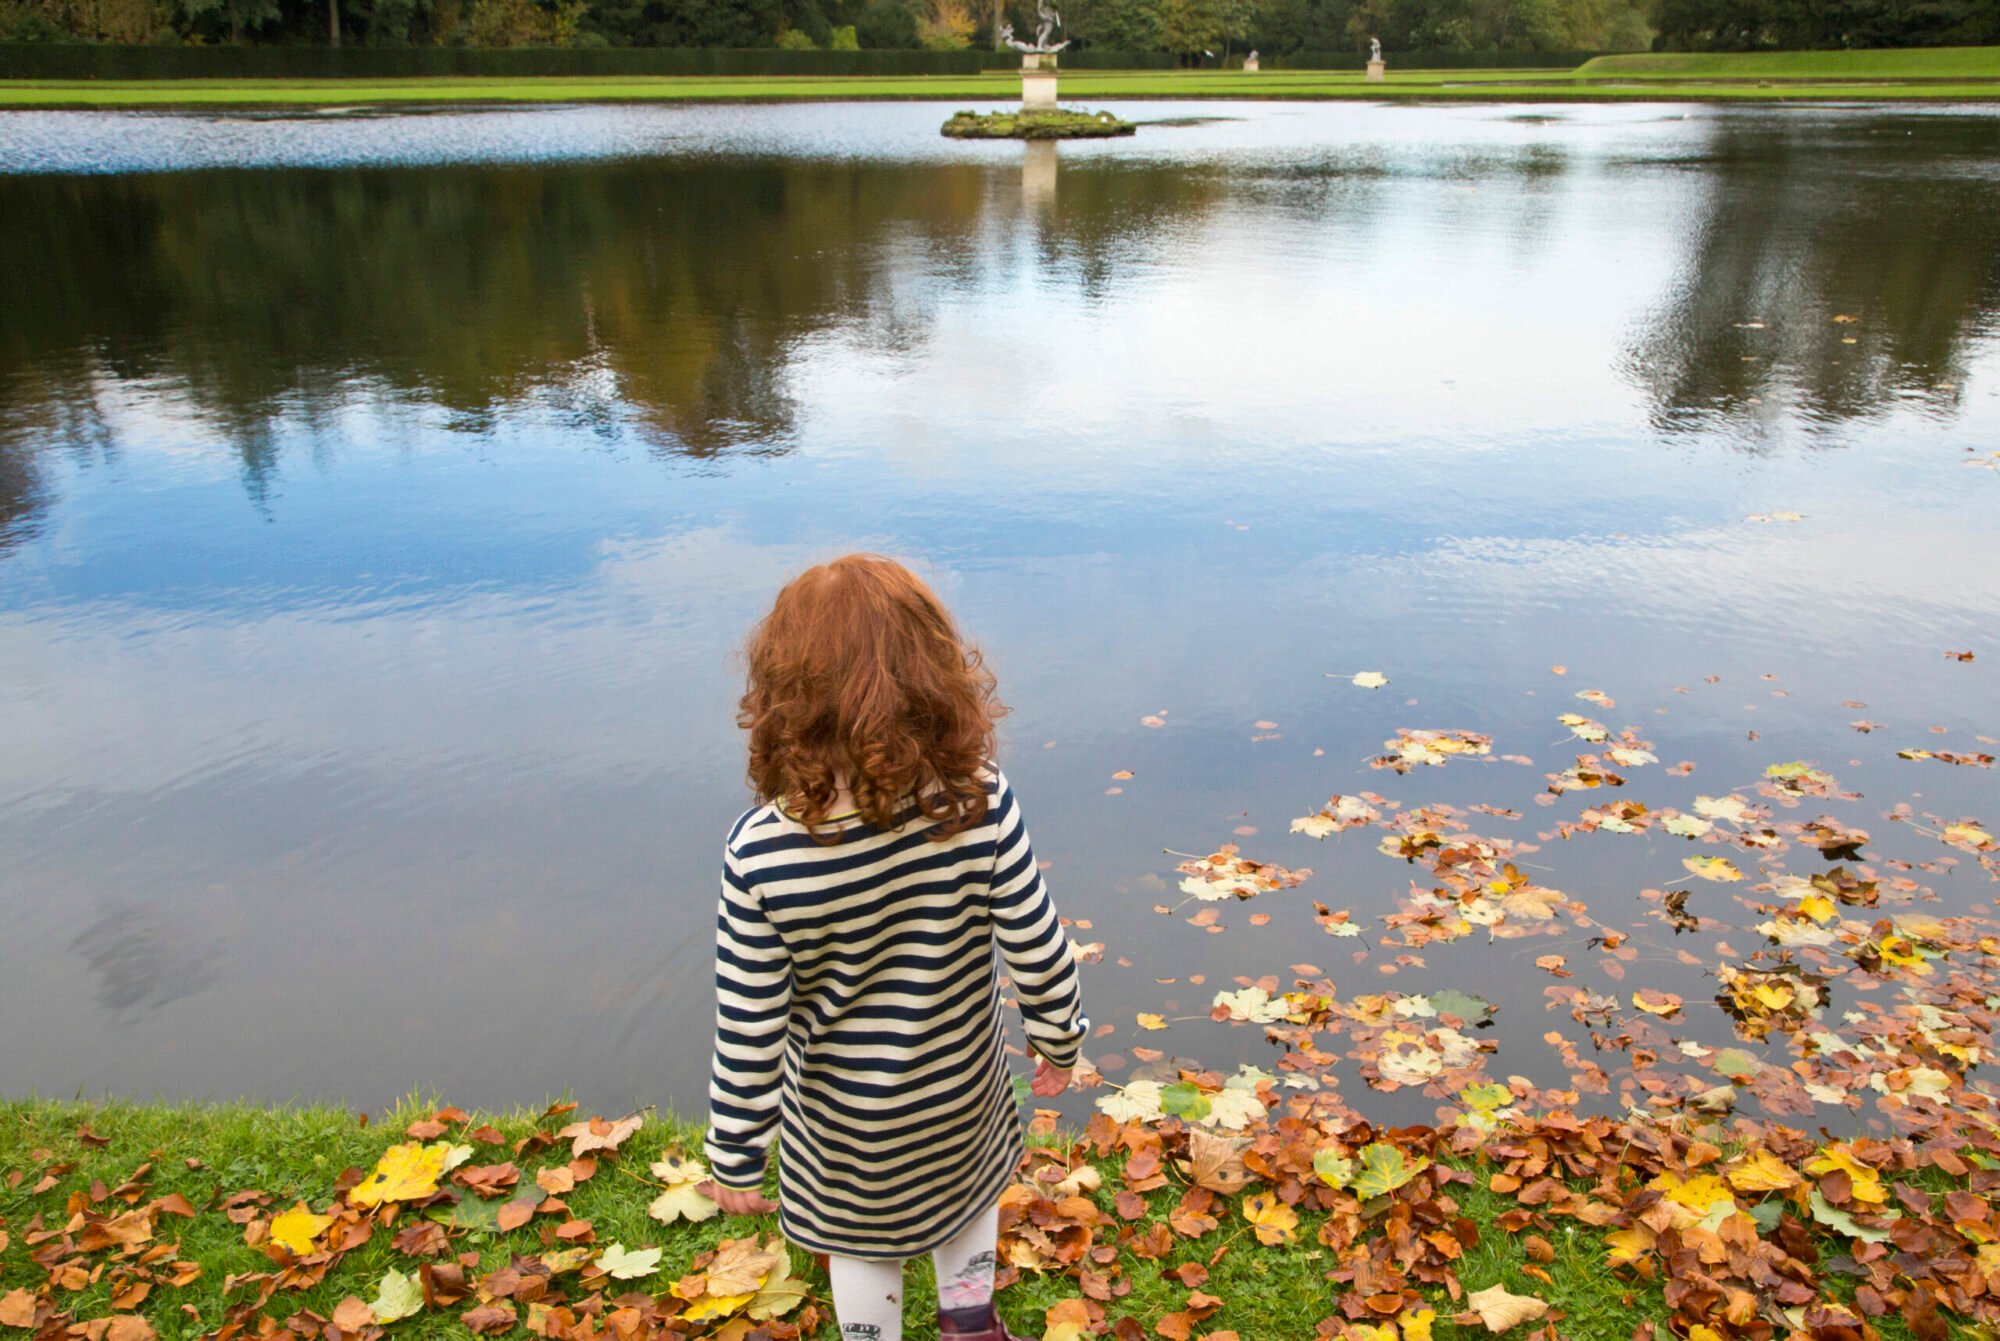 Image name Autumn at Fountains Abbey Studley Royal. Credit National Trust Fountains Abbey Studley Royal. Photographer Chris Lacey 9 scaled the 6 image from the post Heritage Open Days in Yorkshire 2021 in Yorkshire.com.